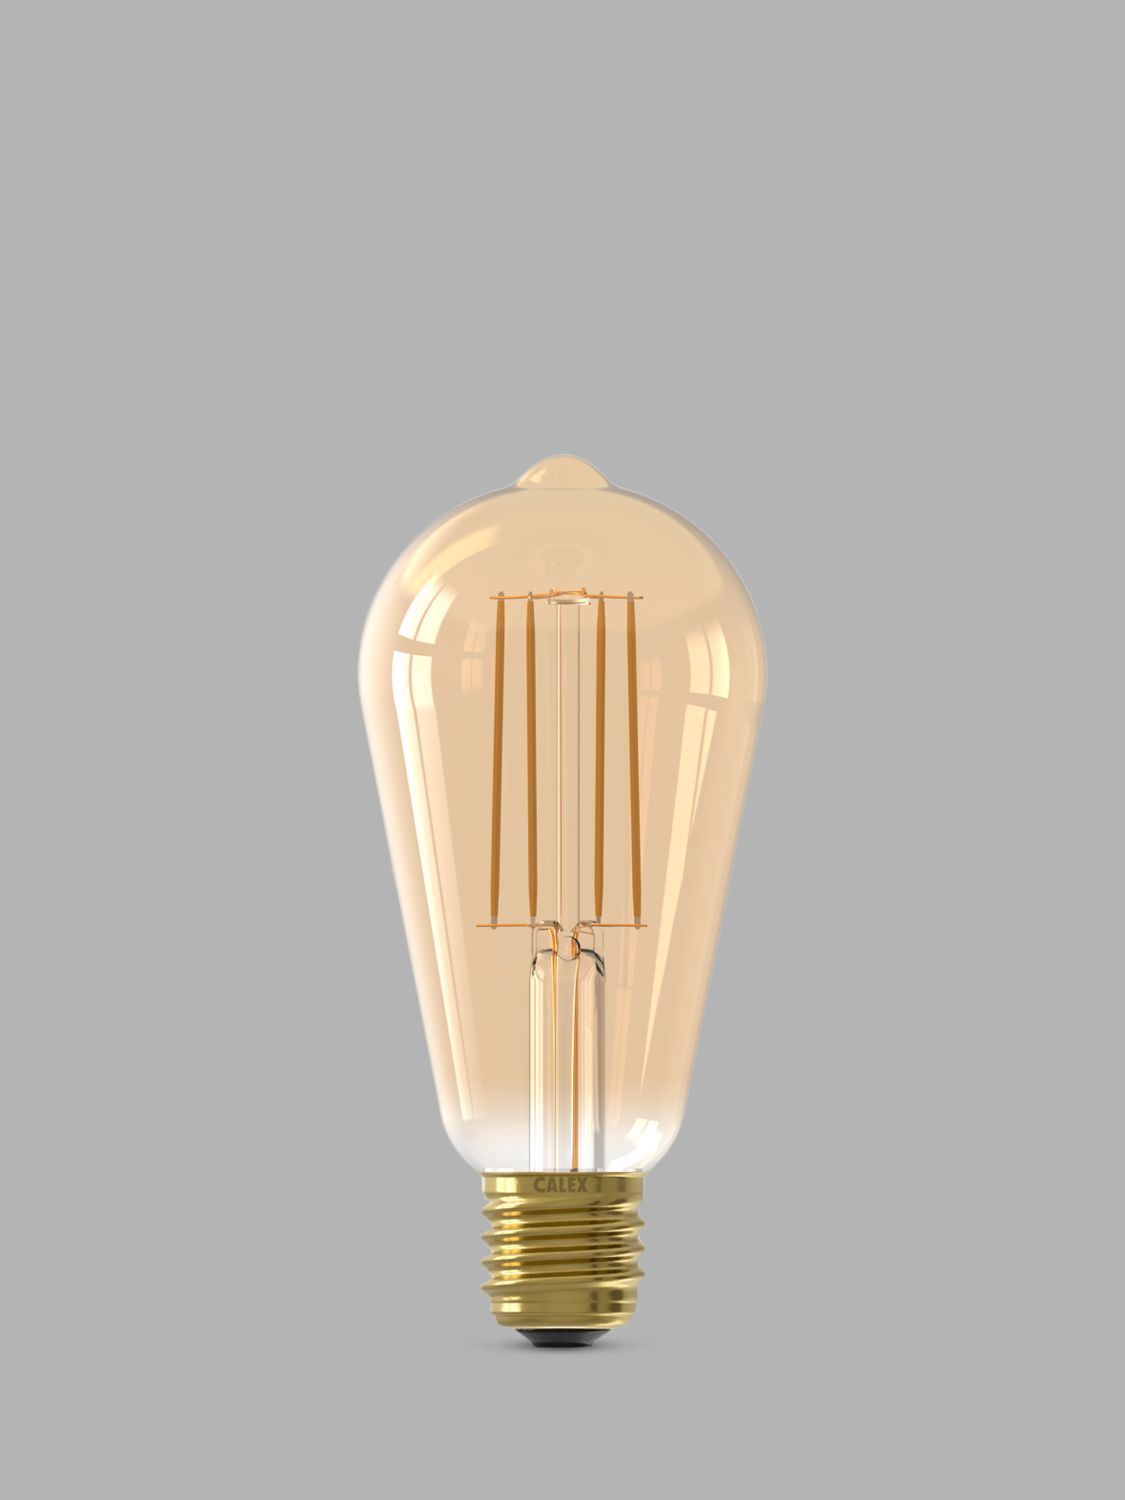 Photo of Calex 3.5w bc led dimmable st64 bulb gold